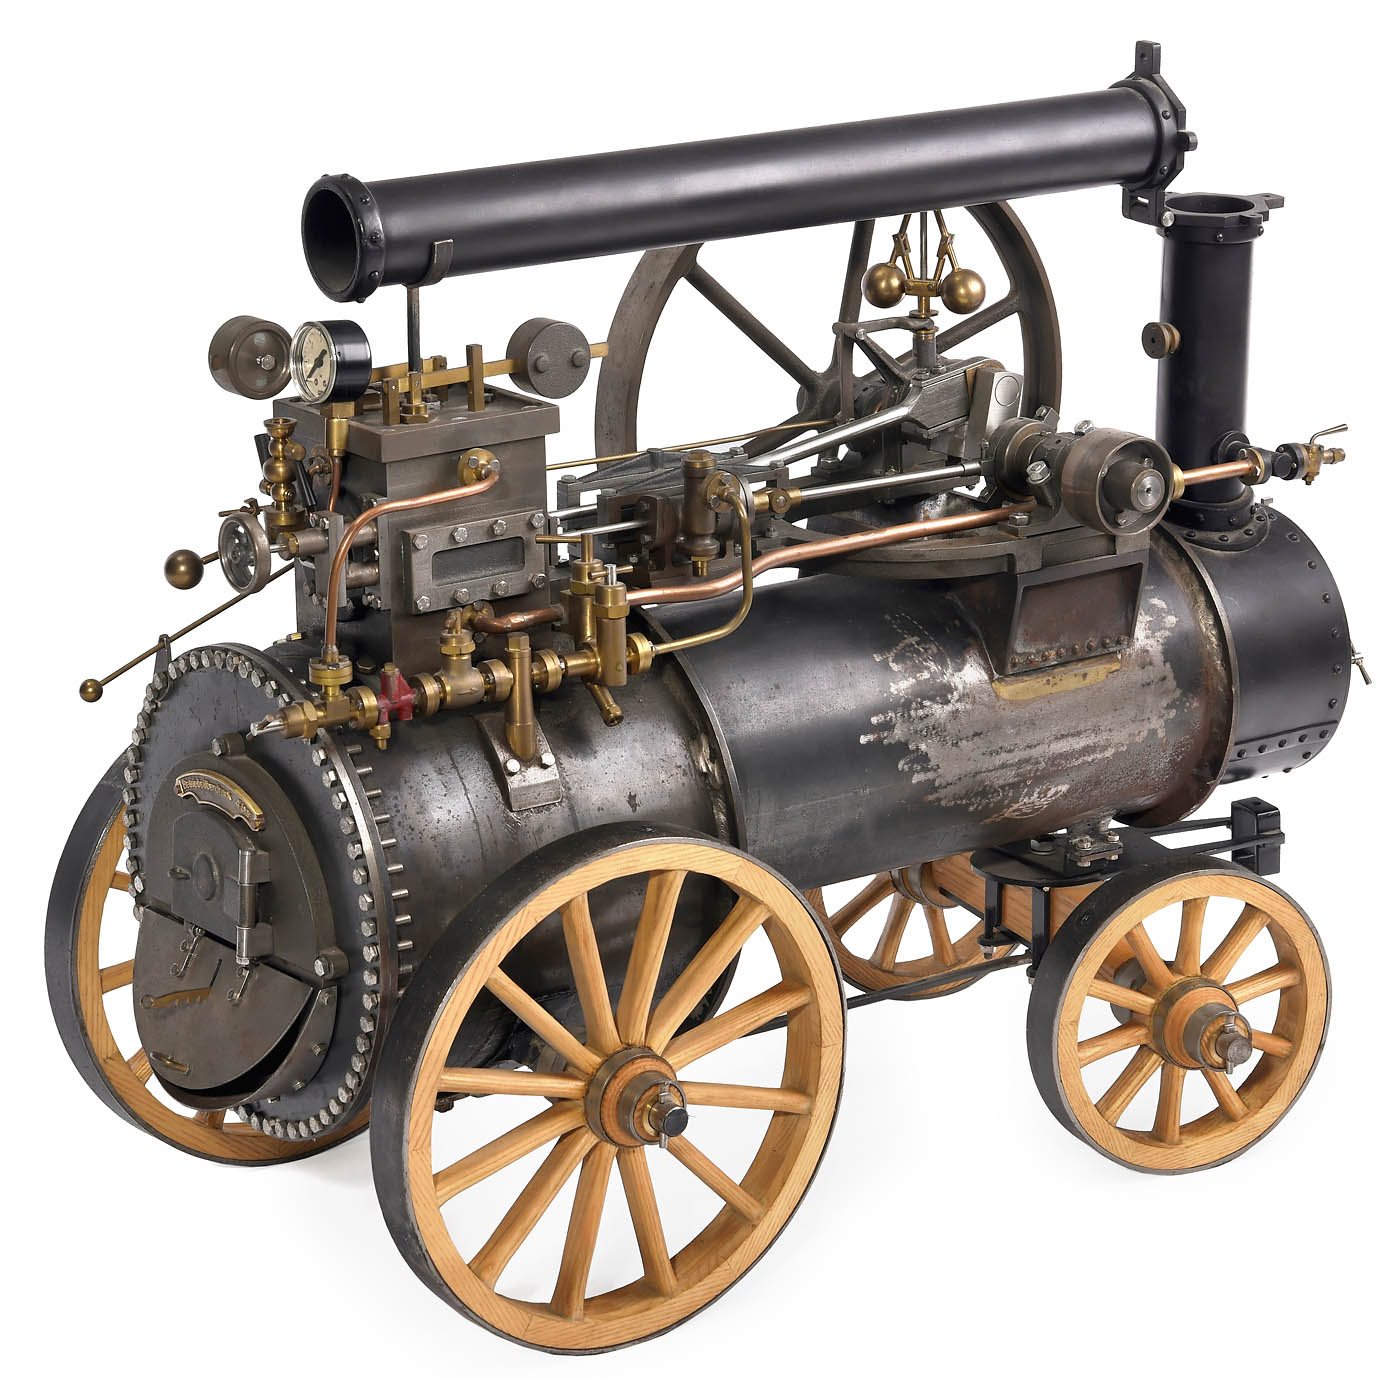 1 ½ in. Scale Model of a Horse-Drawn Portable Engine, c. 1980 - Image 4 of 6